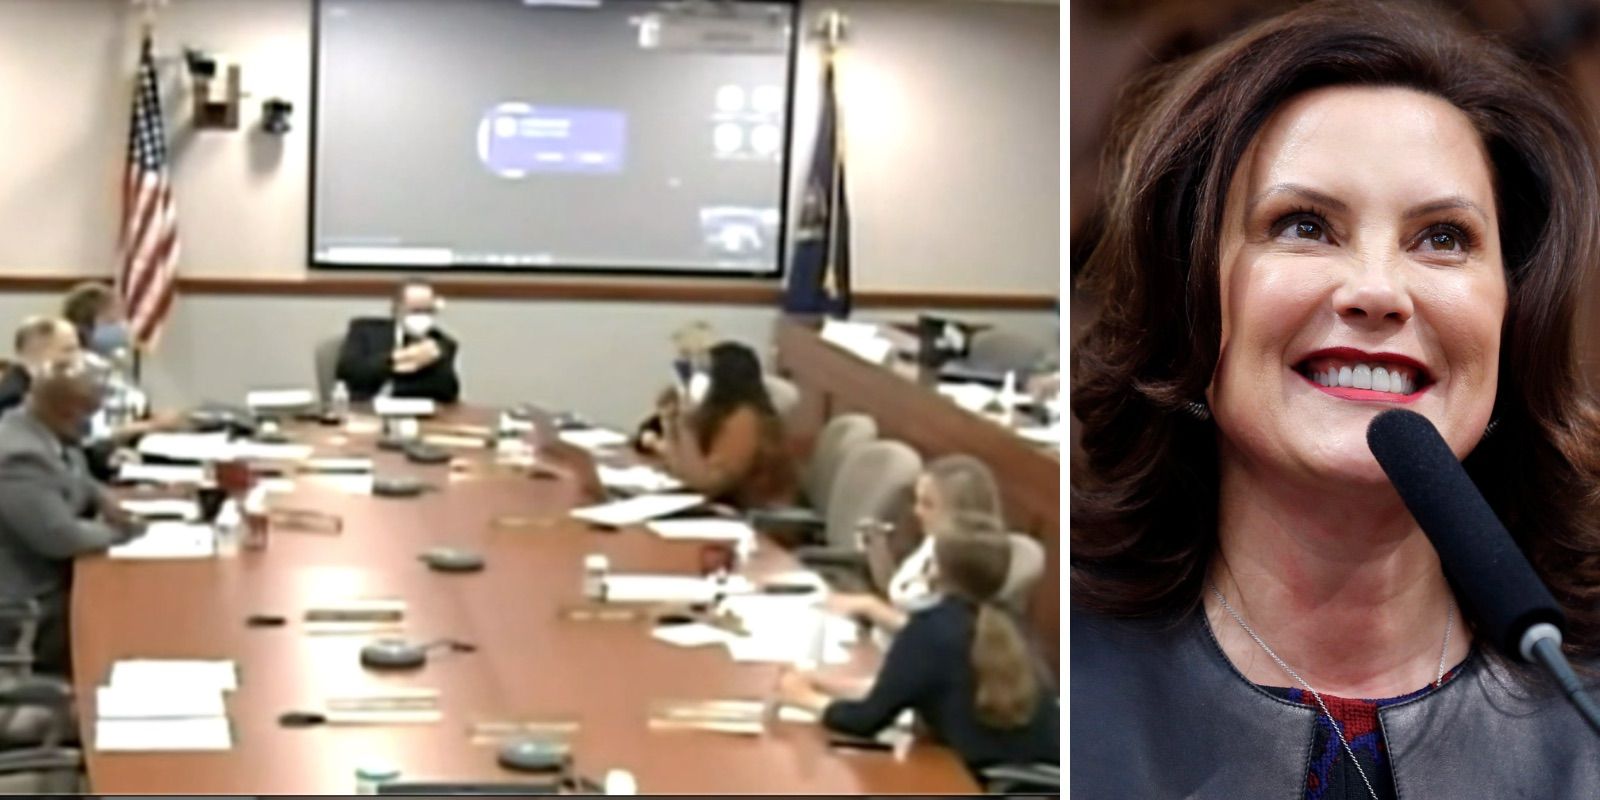 WATCH: Michigan school board divided as Gov. Gretchen Whitmer recommends masking for all students